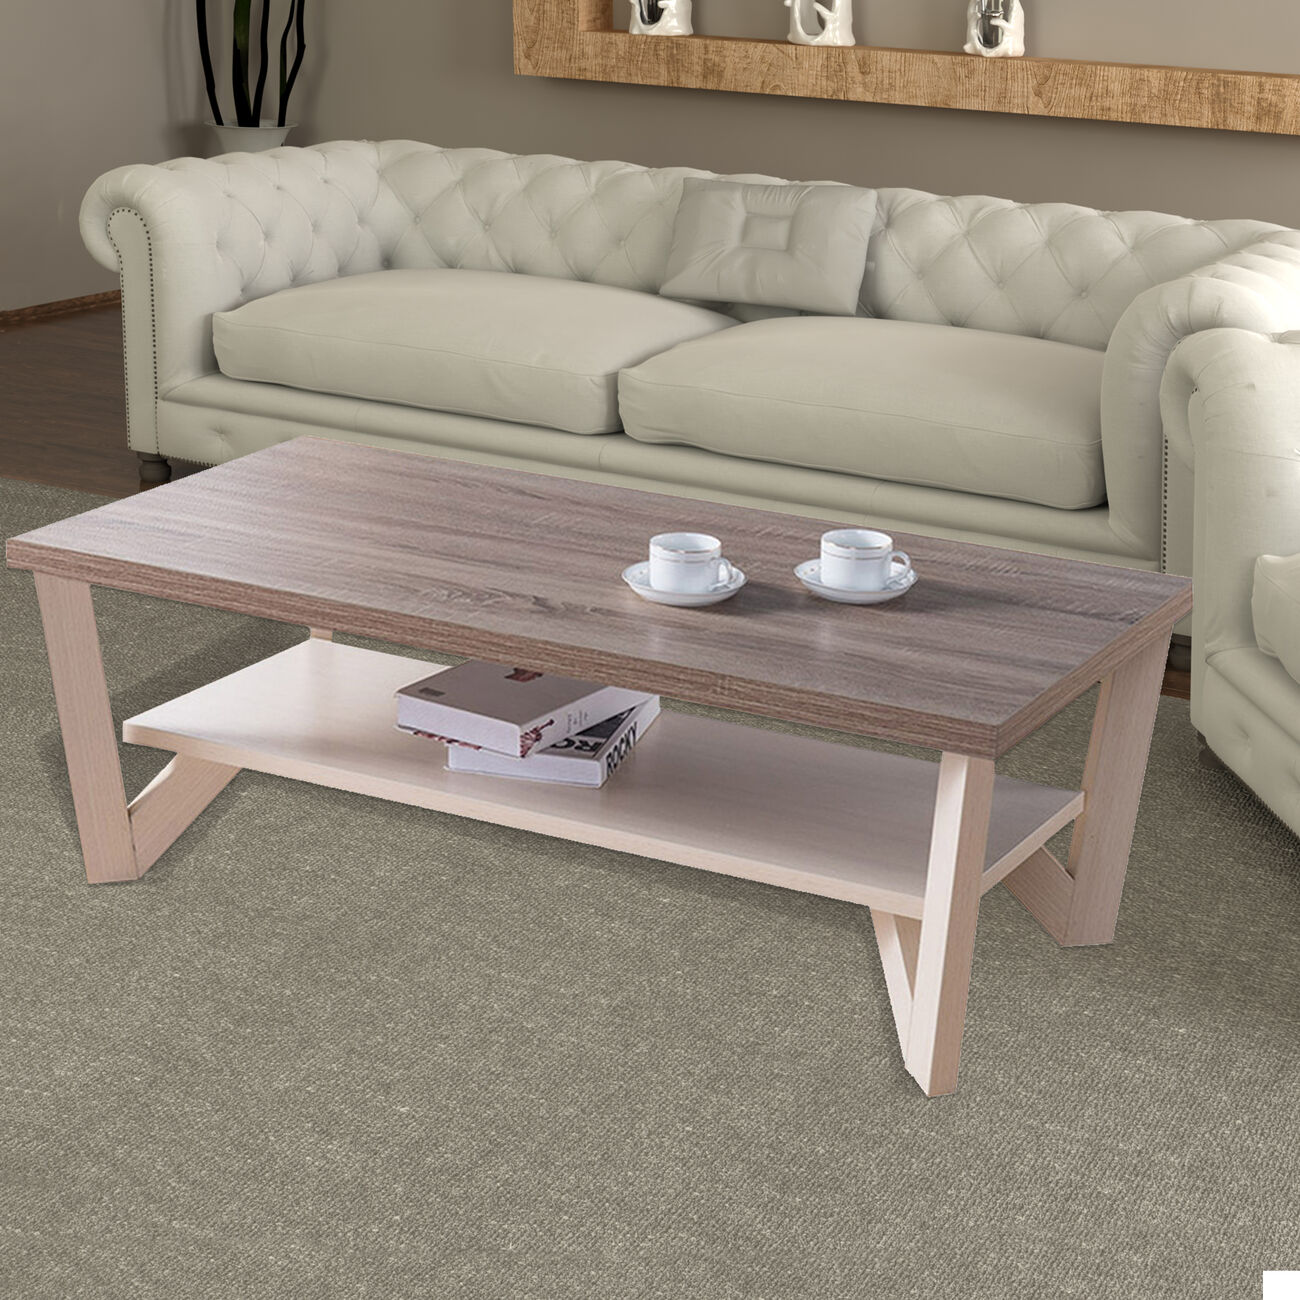 Stylish Center Display Coffee Table, Brown and White